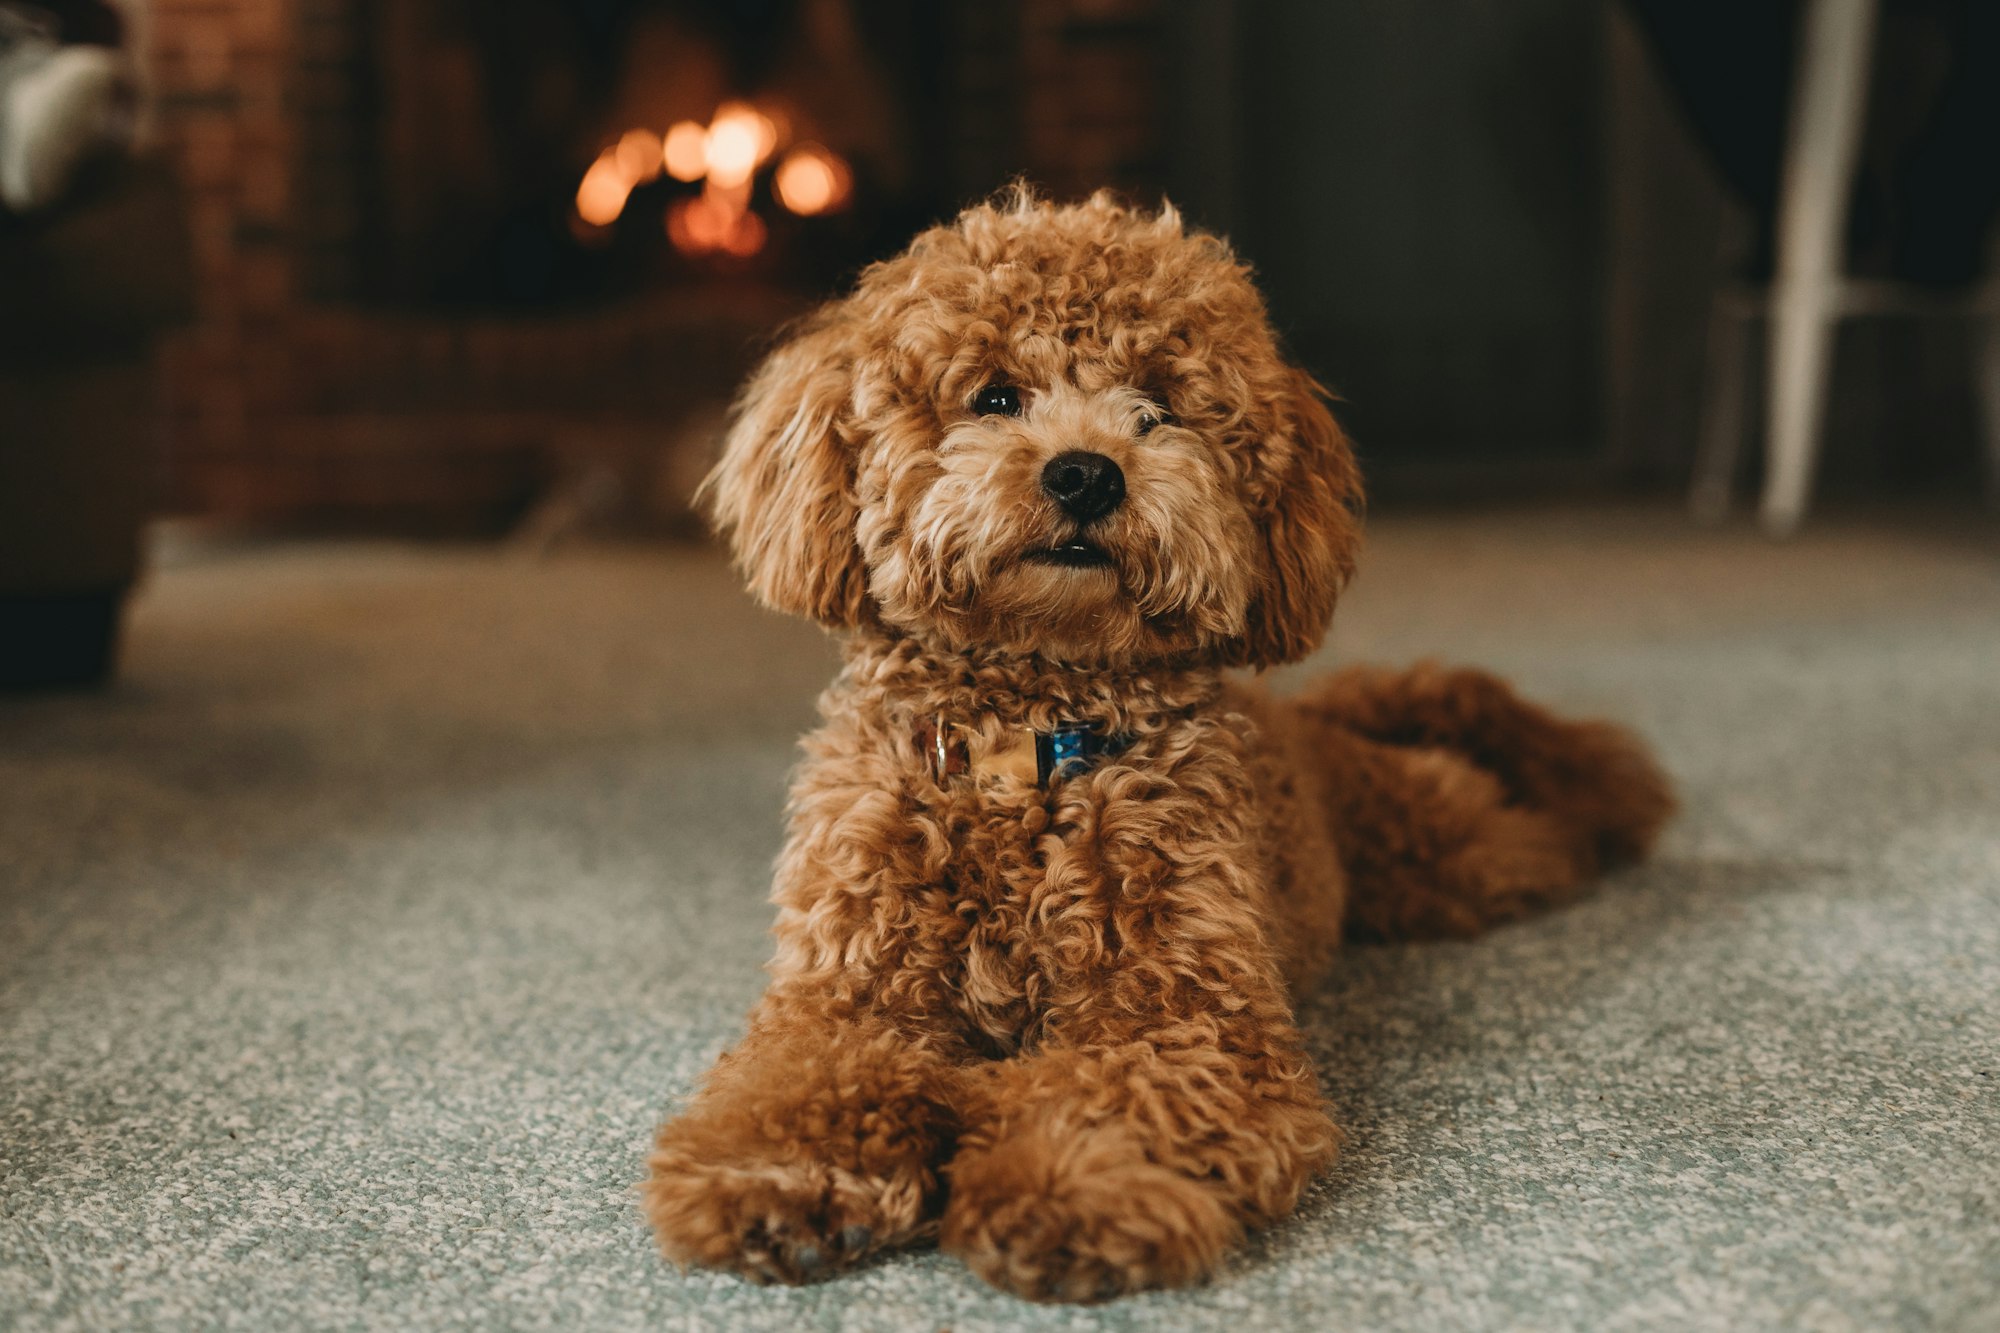 Fluffy dog in front of fire.